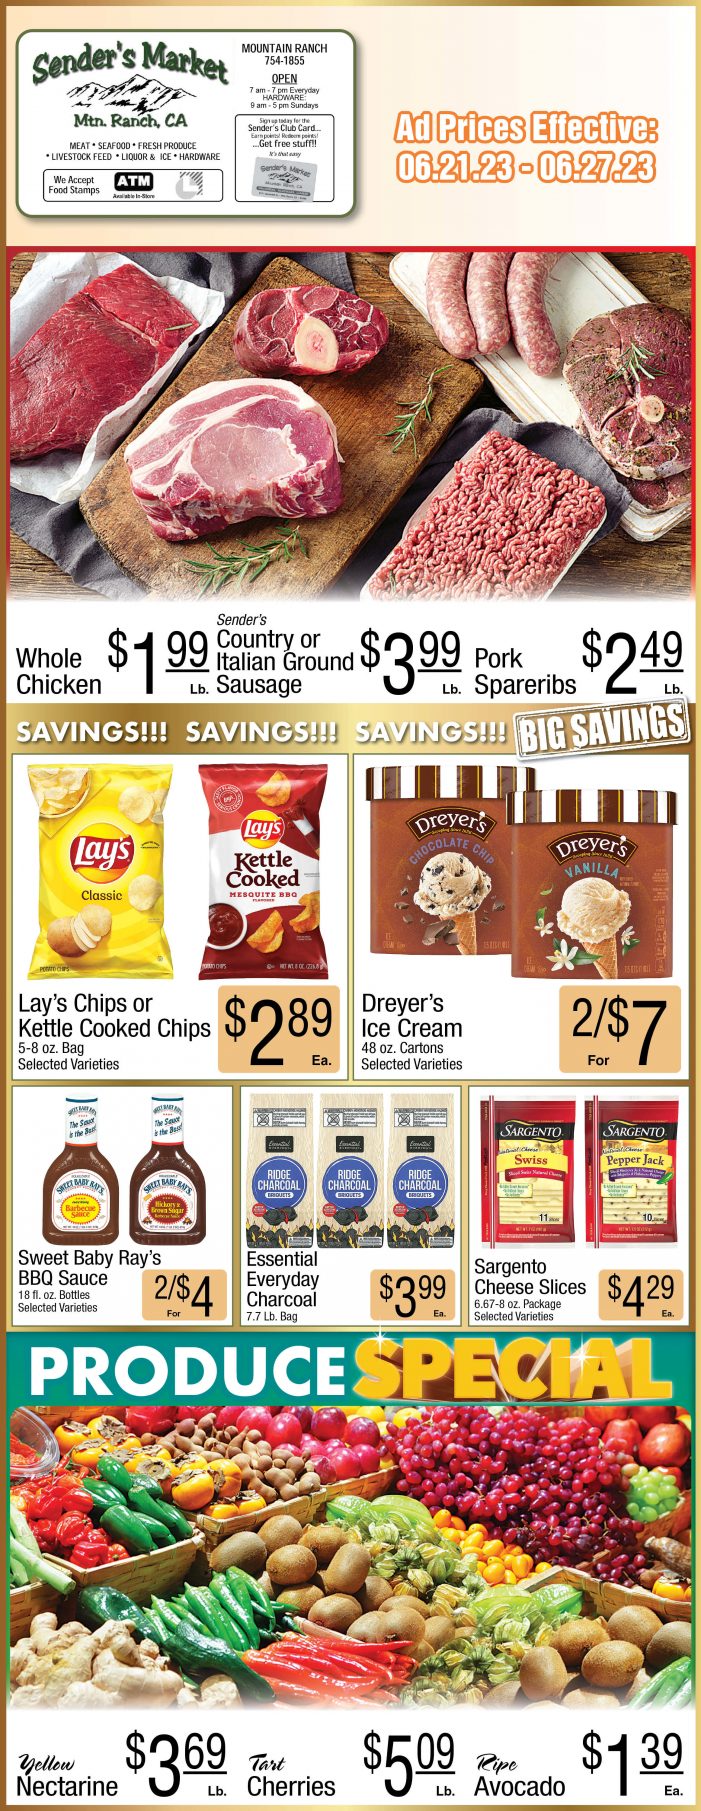 Sender’s Market Weekly Ad & Grocery Specials June 21 ~ 27! Shop Local & Save!!